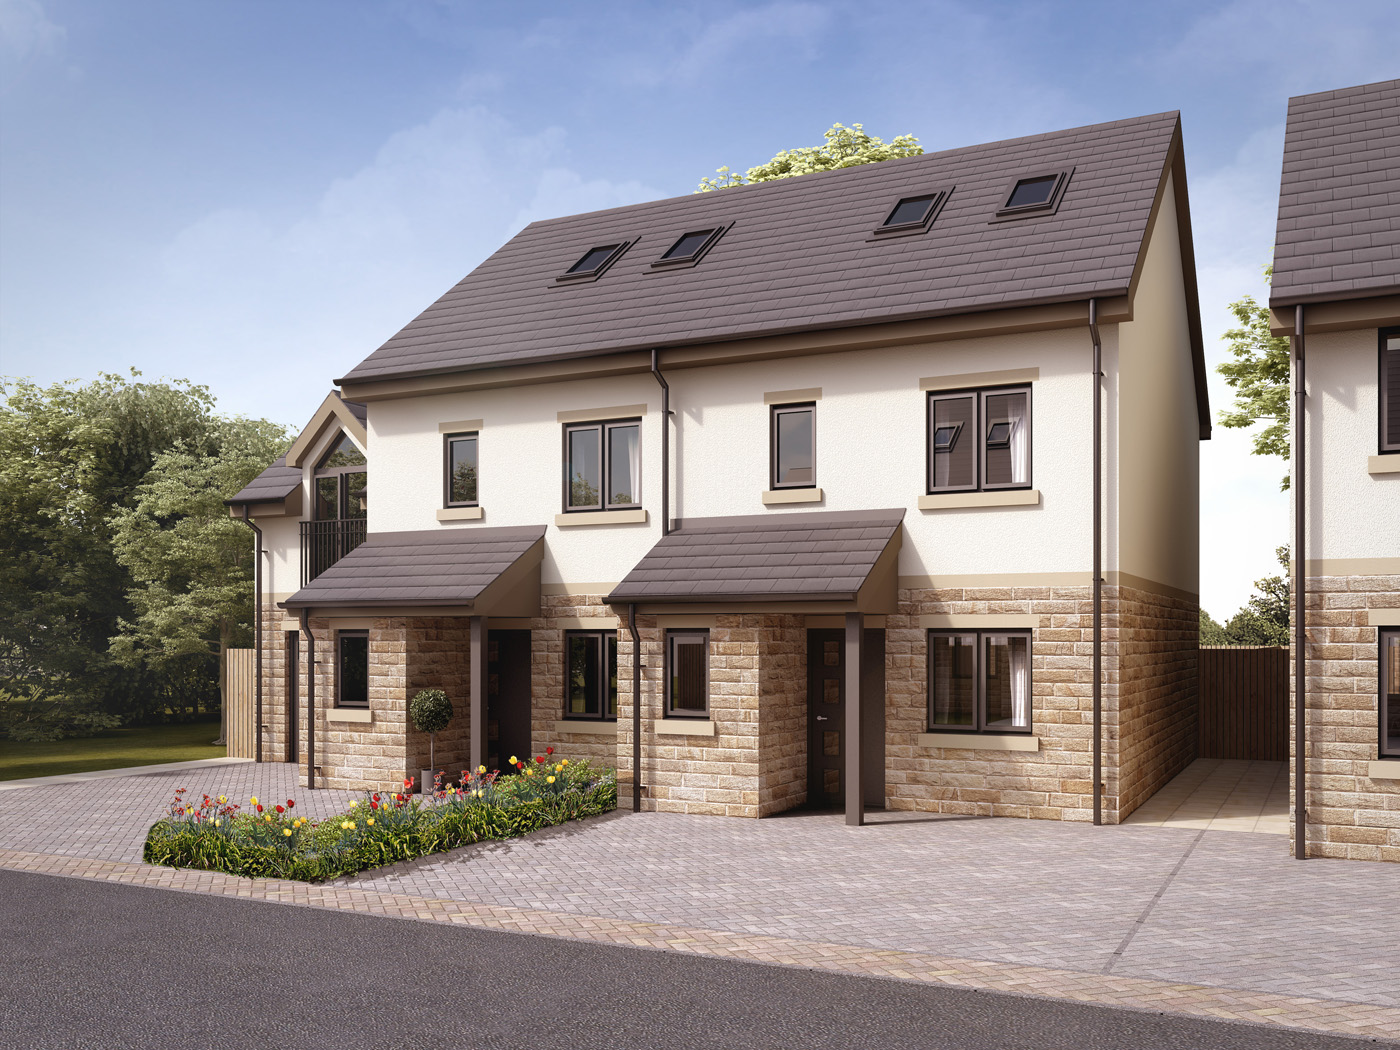 RN Wooler new Homes for sale in ilkley